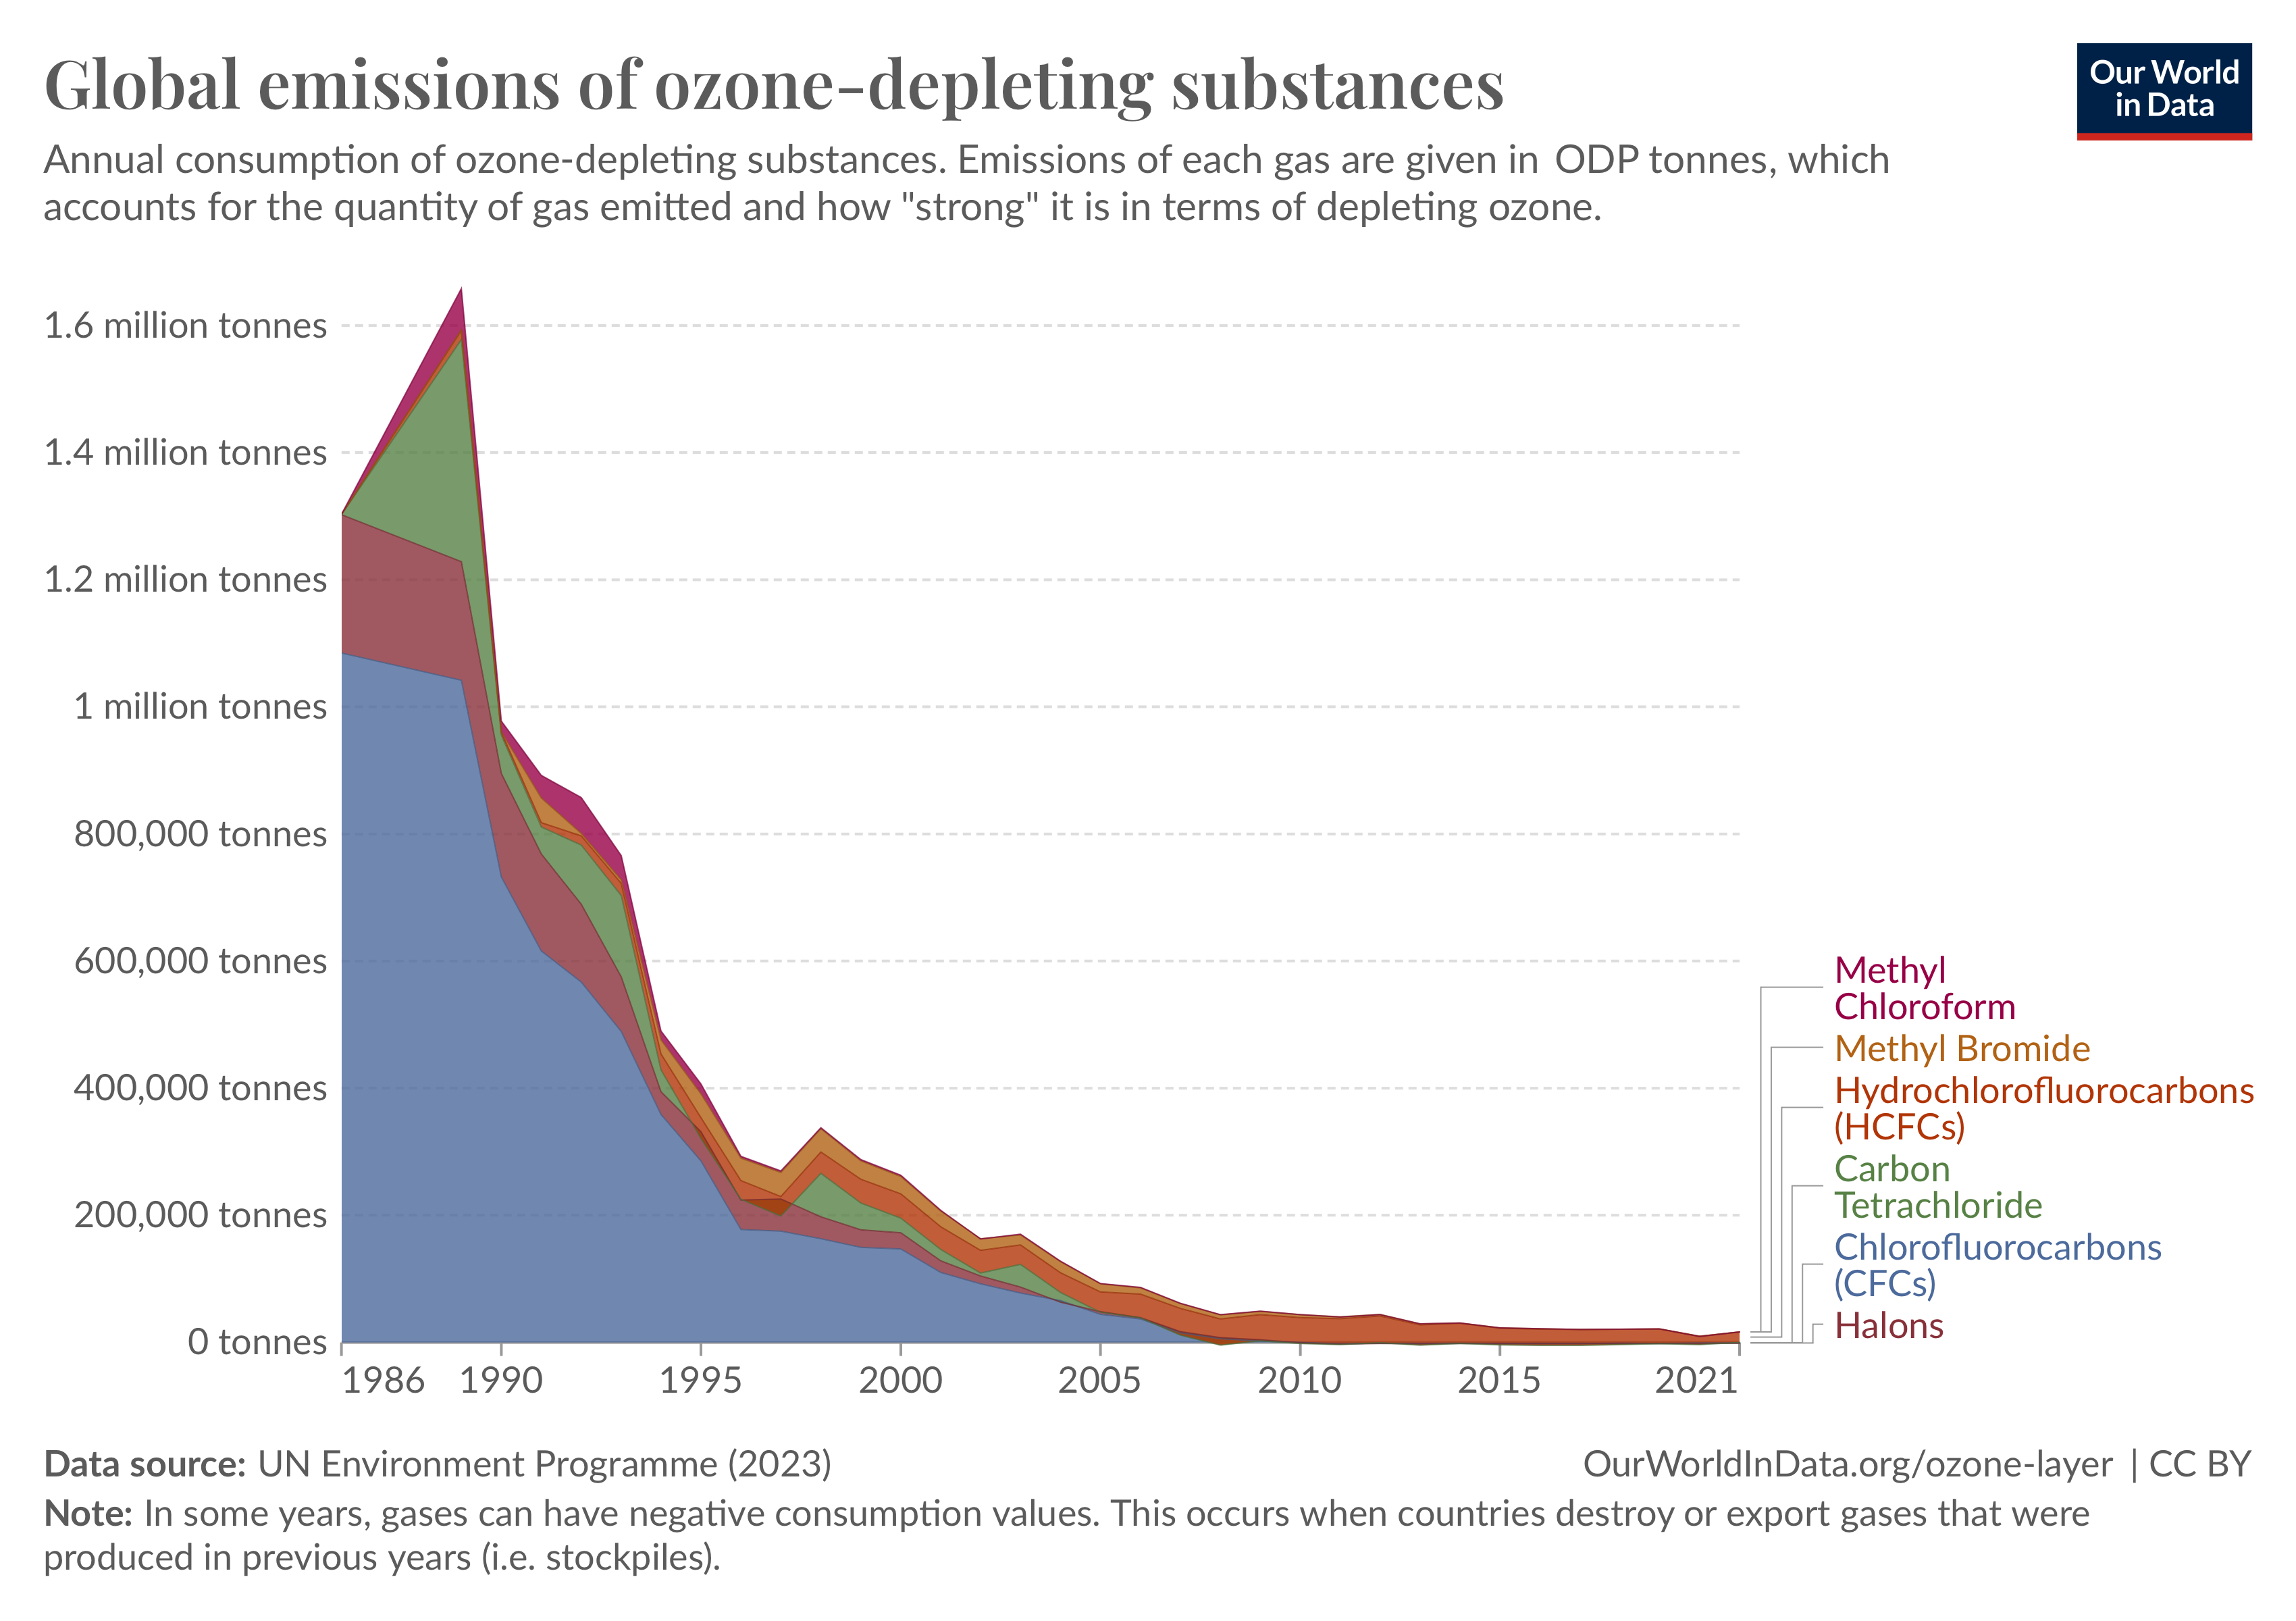 Graph titled 'Global emissions of ozone-depleting substances' showing the annual consumption of various ozone-depleting gases from 1986 to 2021, measured in ODP (ozone-depleting potential) tonnes. The stacked area graph indicates a peak around 1988 and a general decline thereafter. Each gas type is color-coded: CFCs, Halons, Carbon Tetrachloride, Methyl Chloroform, Methyl Bromide, and HCFCs. The data source is the UN Environment Programme (2023). A note explains that negative consumption values can occur when countries destroy or export gases that were produced in previous years, like stockpiles.